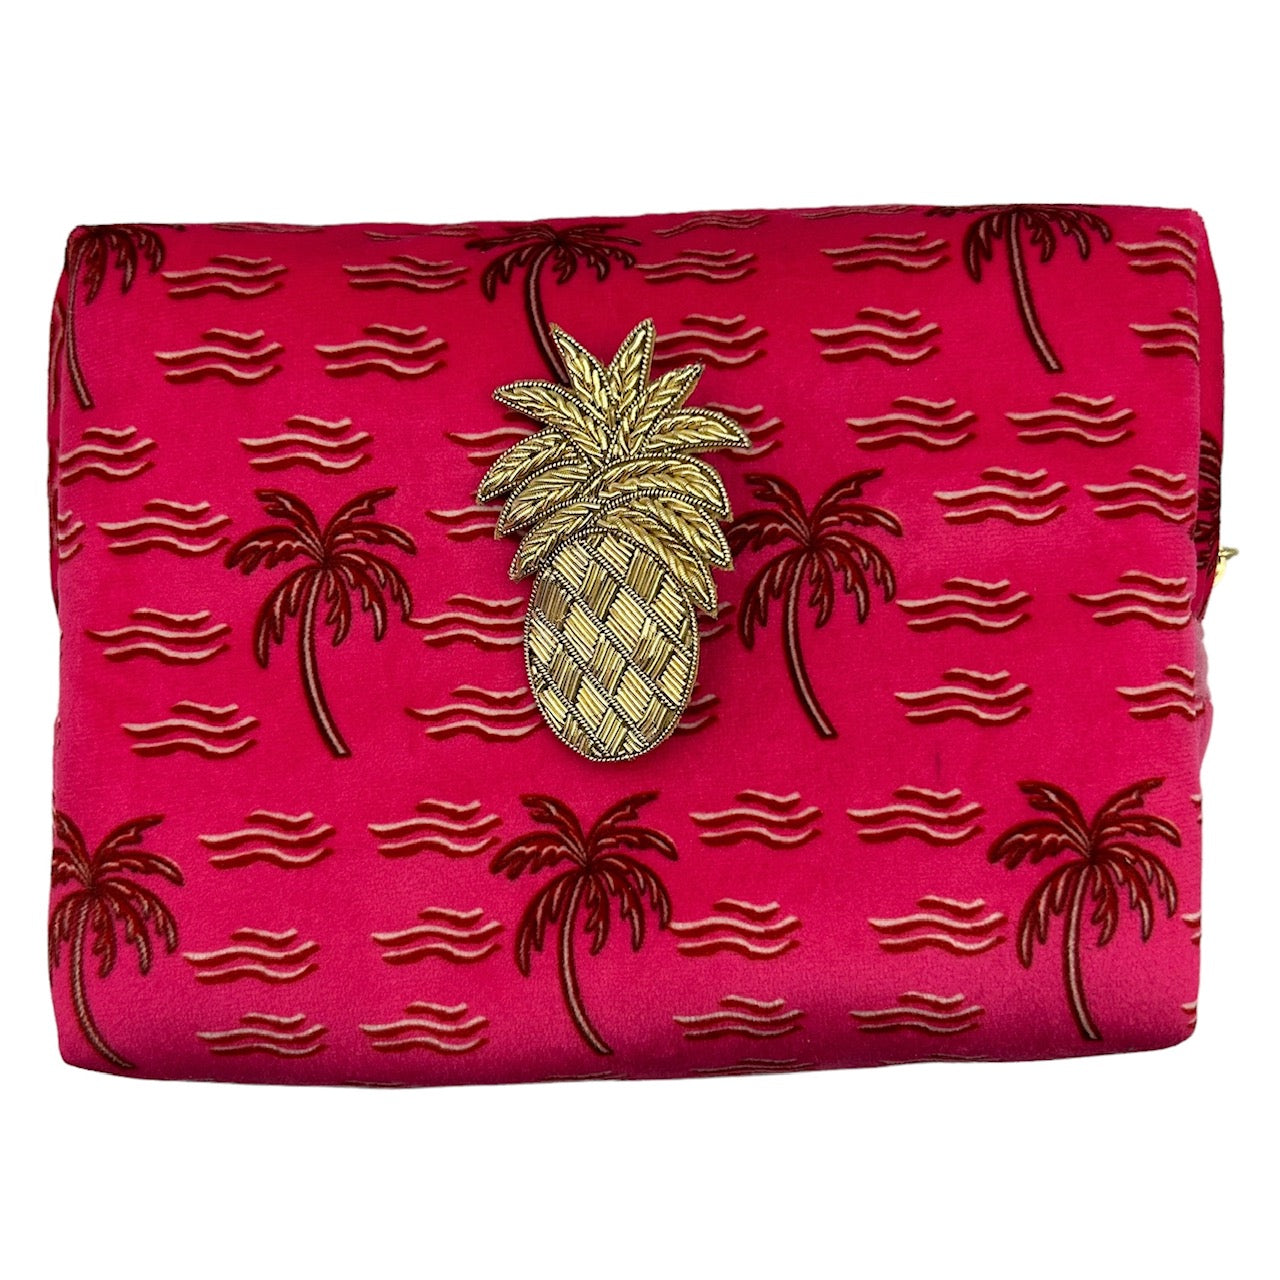 Pink palm large make-up bag & pineapple  brooch - recycled velvet, large and small